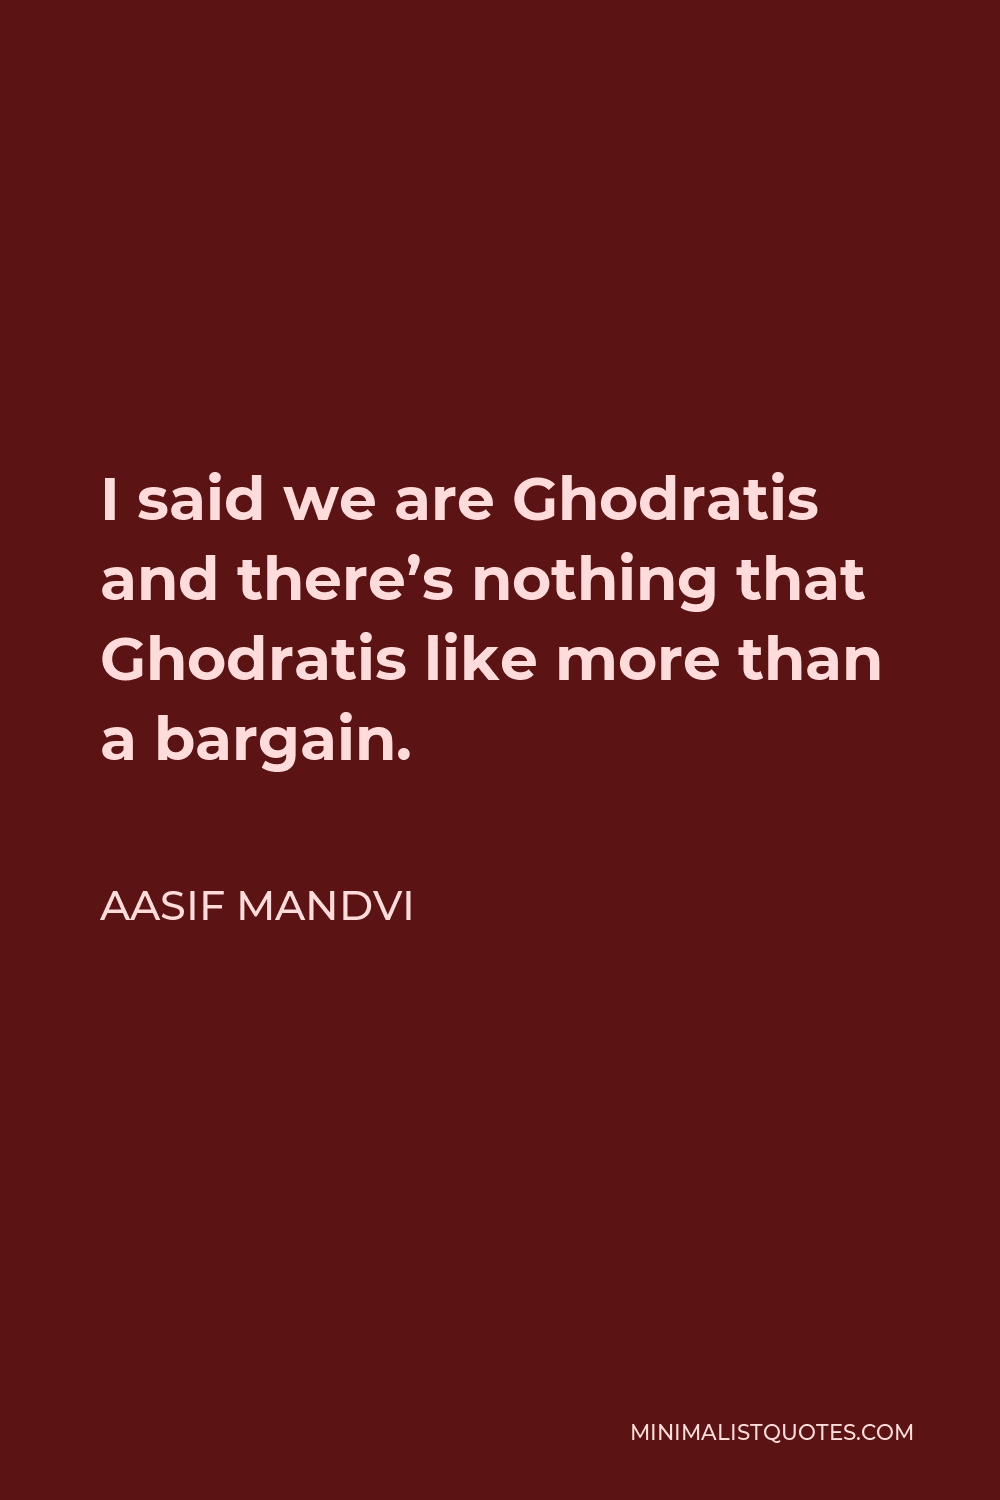 Aasif Mandvi Quote - I said we are Ghodratis and there’s nothing that Ghodratis like more than a bargain.